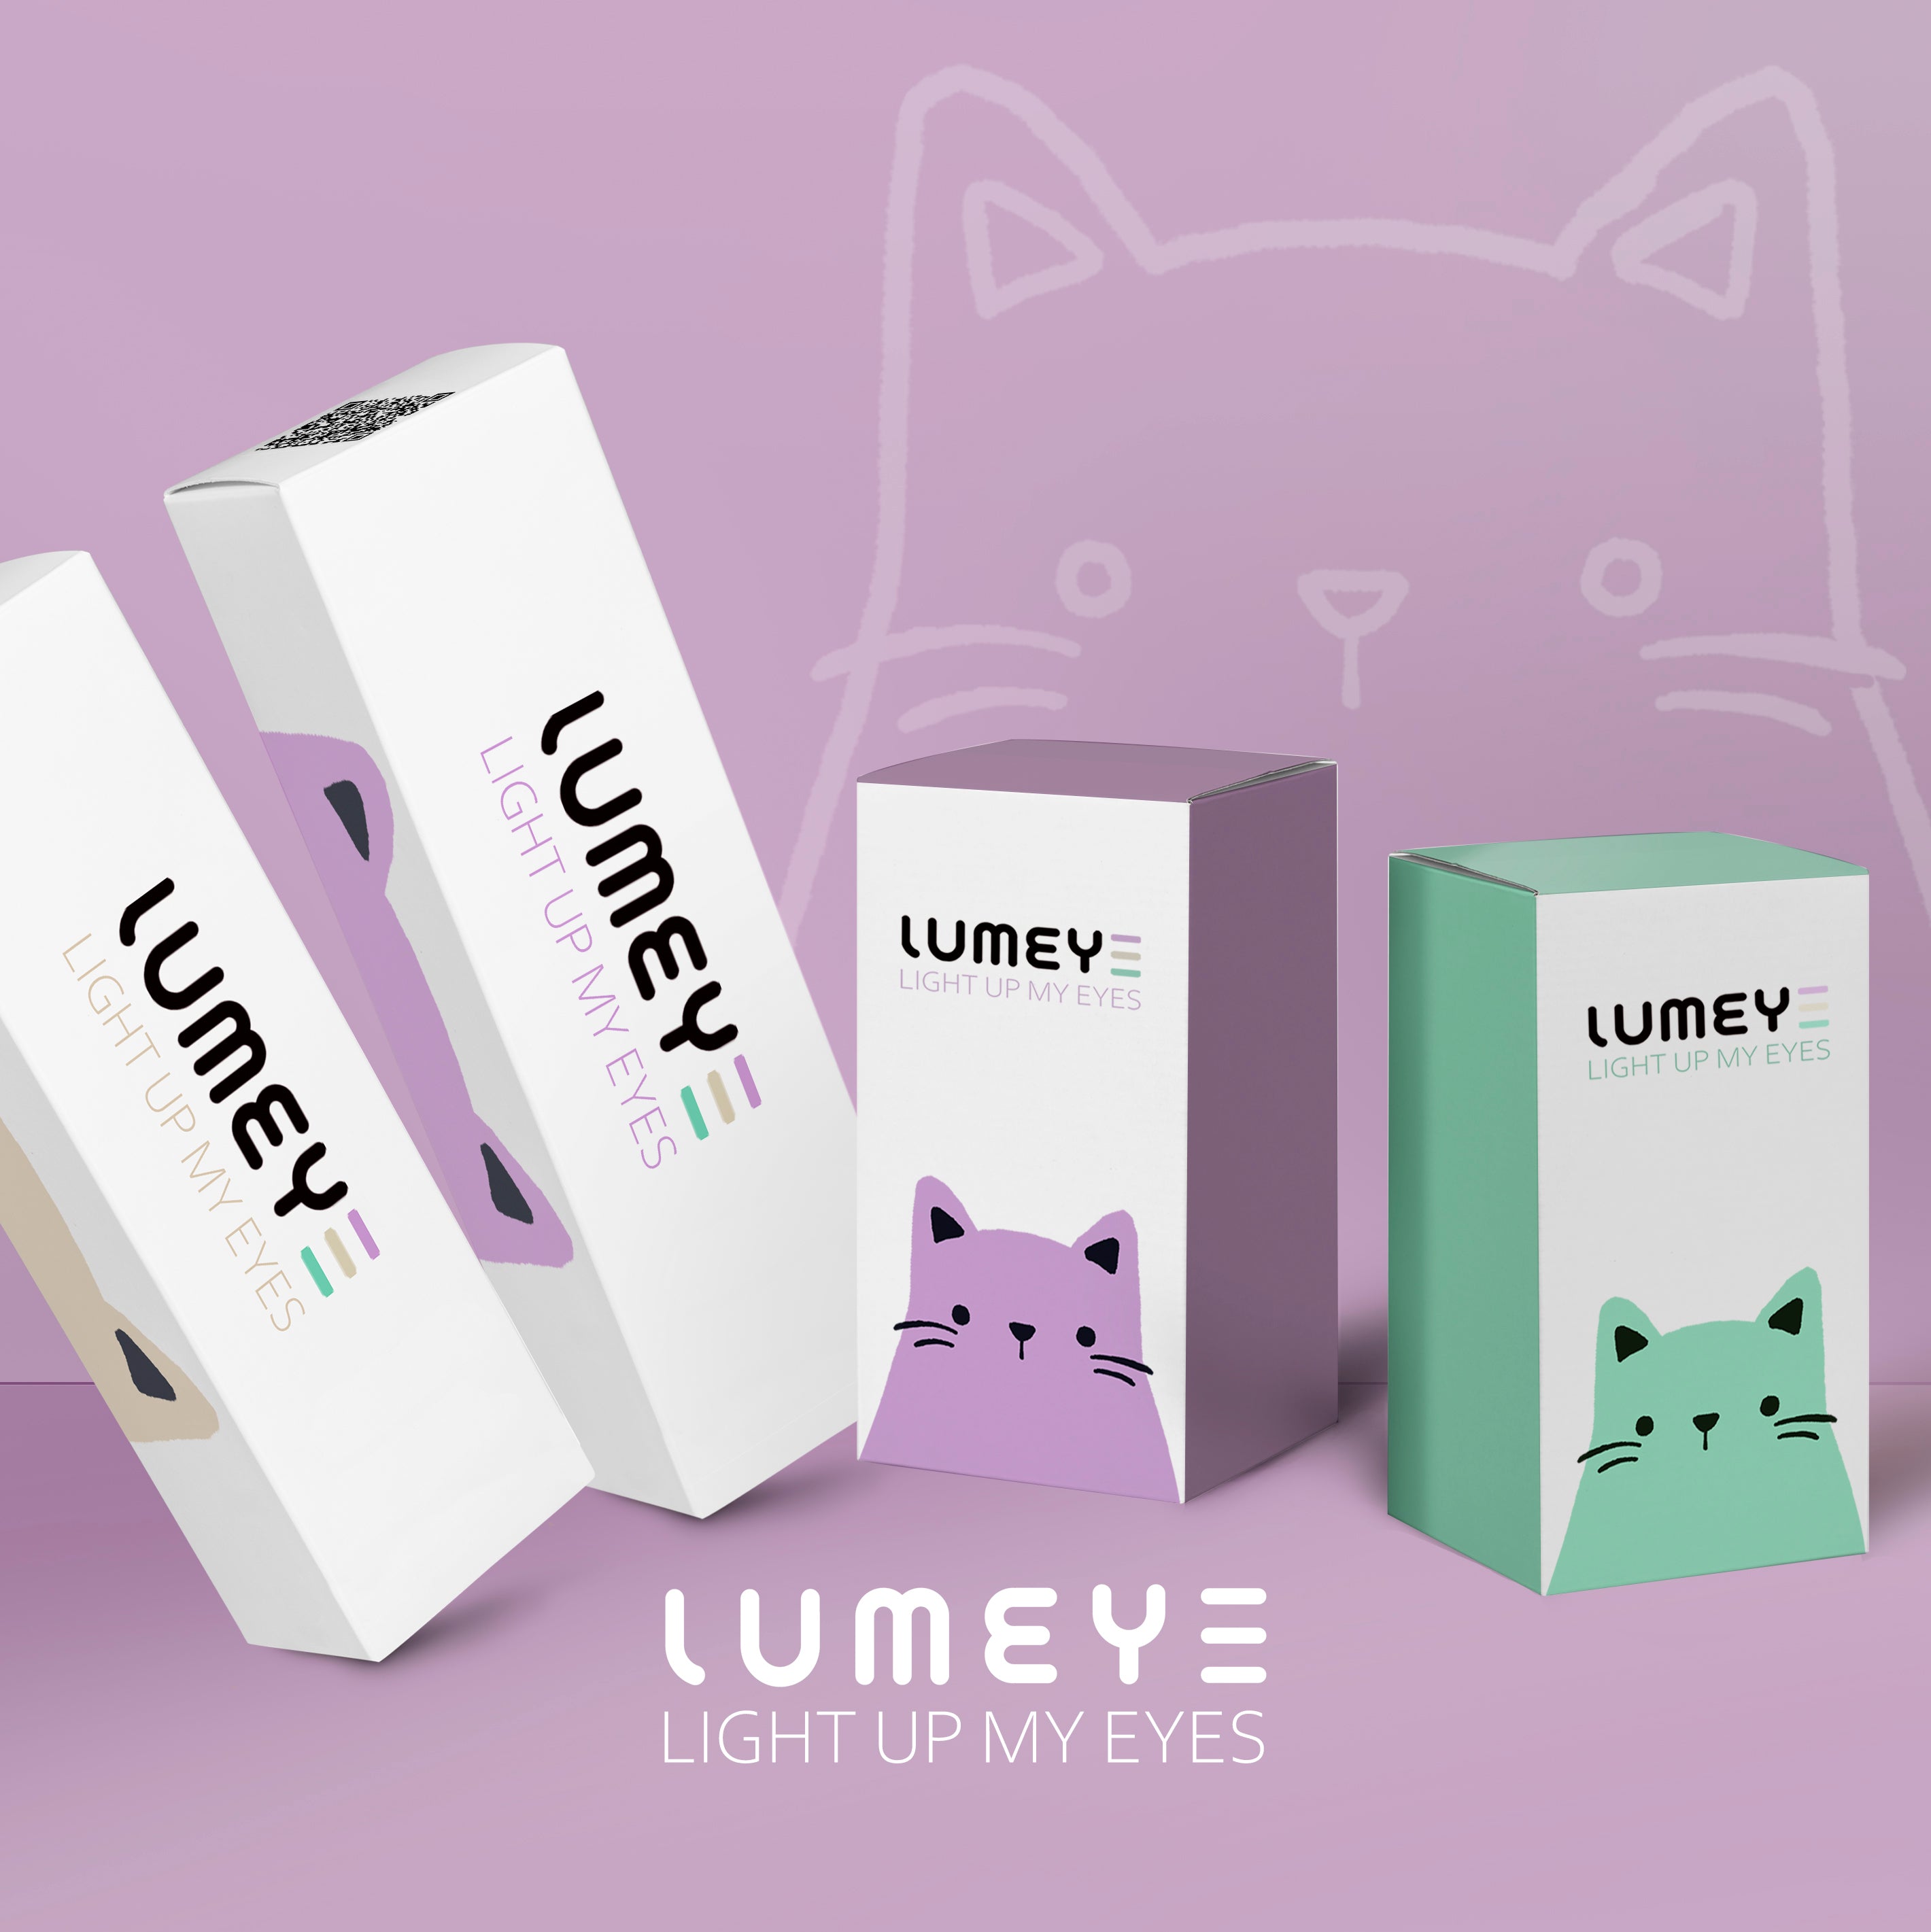 Best COLORED CONTACTS - LUMEYE Mix Gray Colored Contact Lenses - LUMEYE